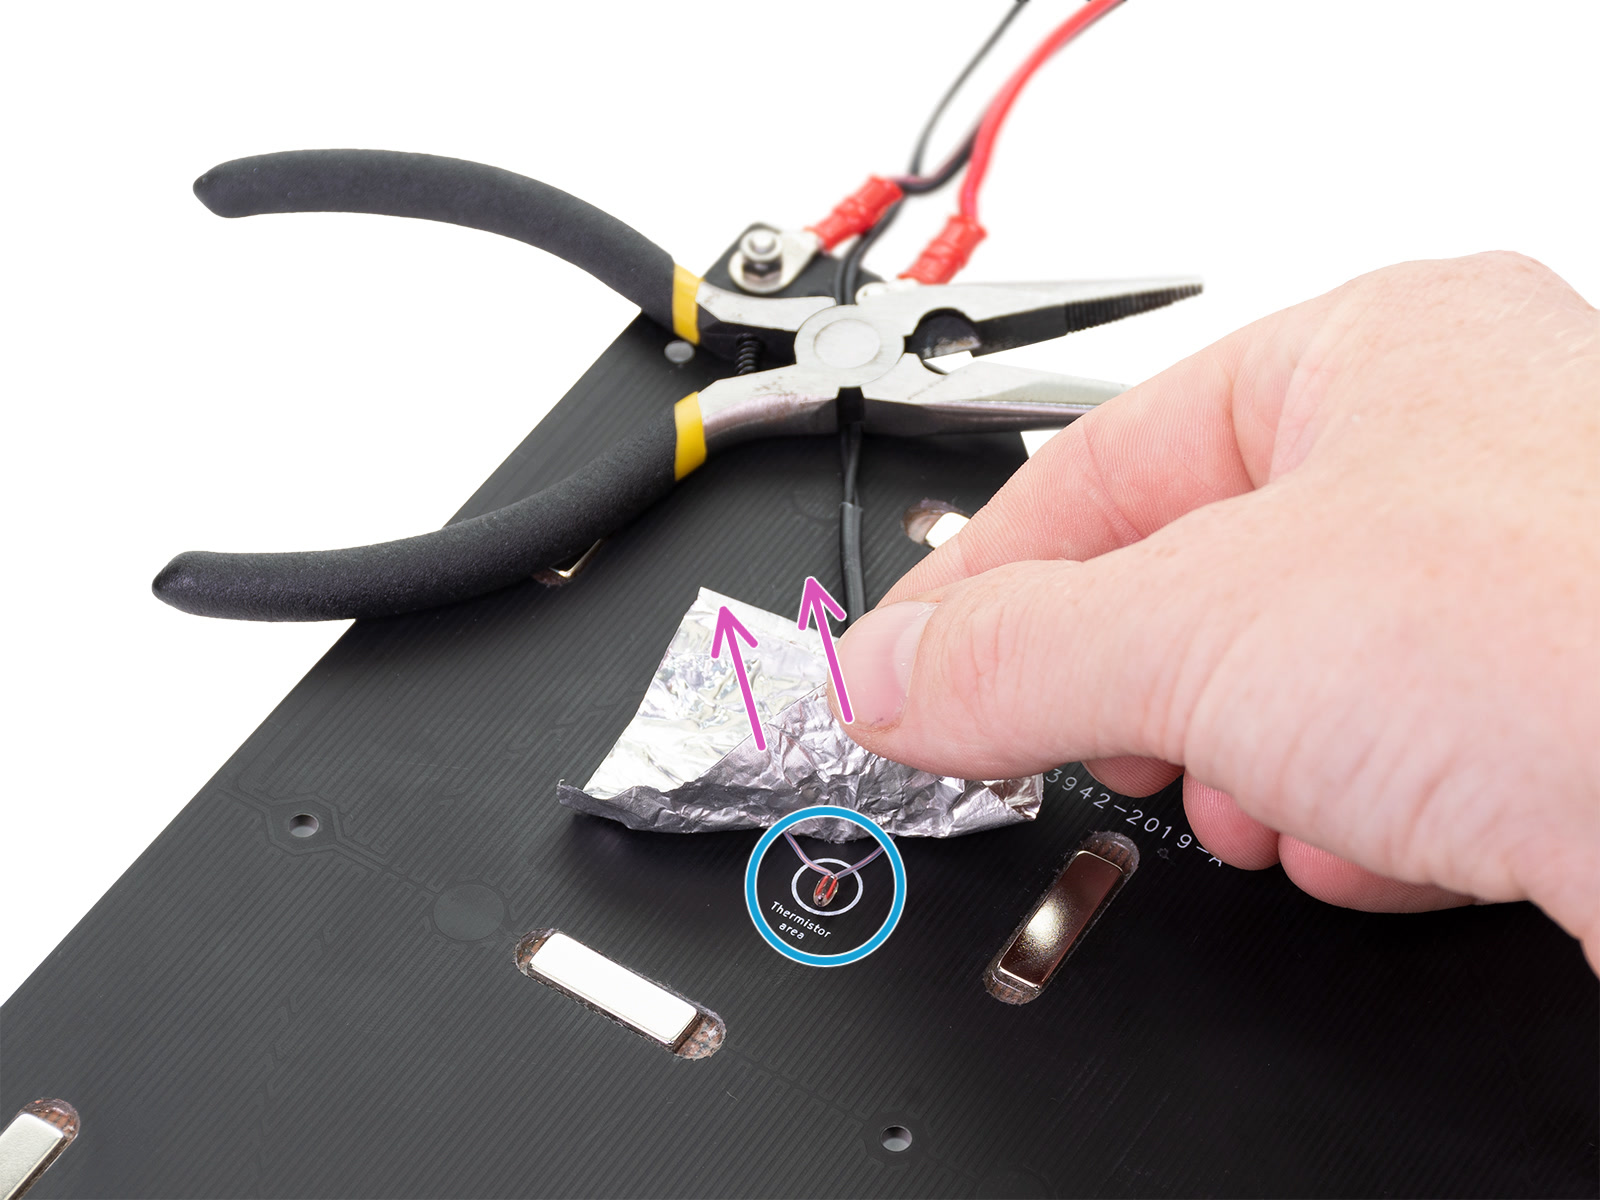 Fixing the thermistor in place